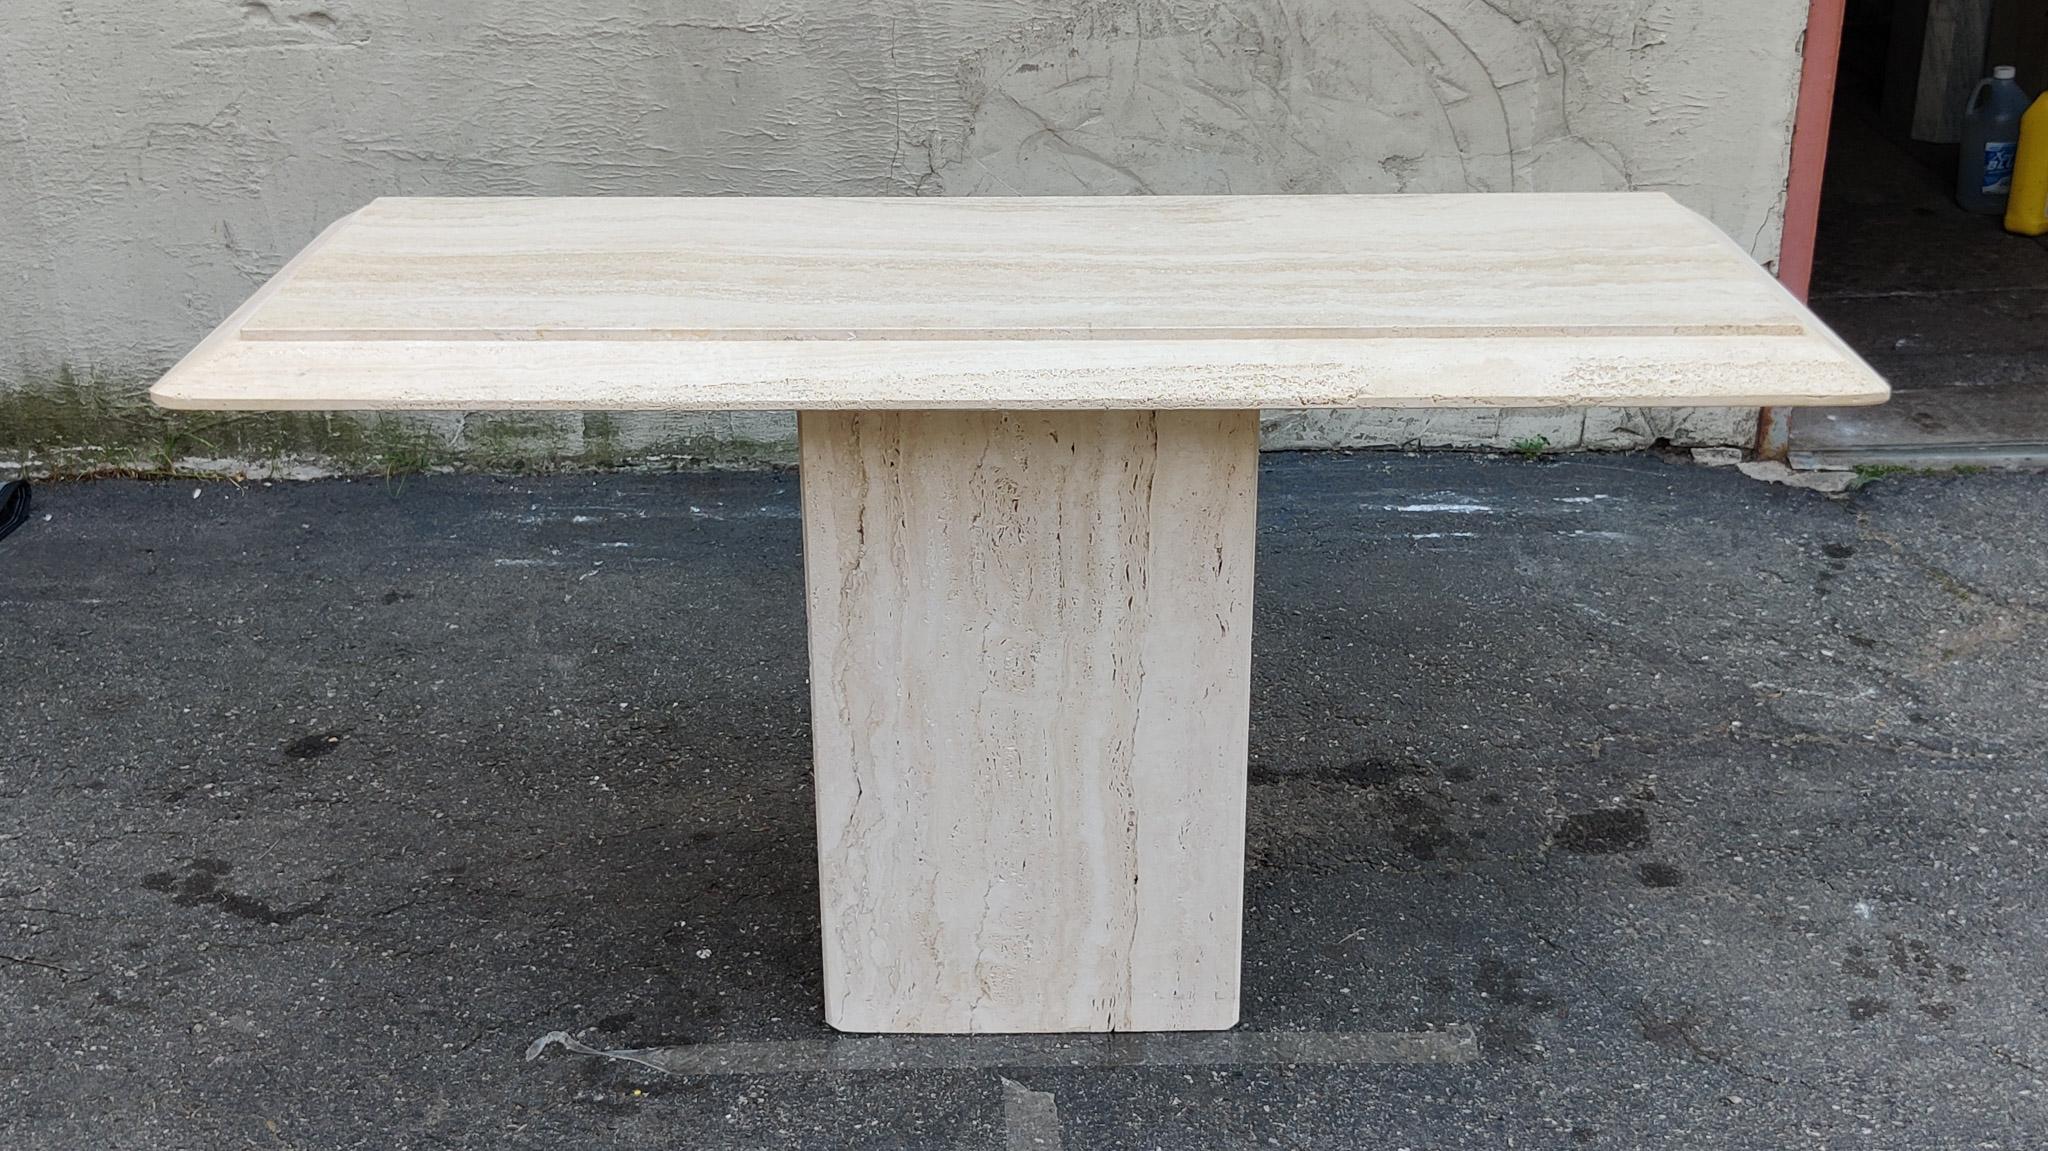 An amazing Italian console table with natural and porous travertine edging. The simplicity of the design and surface treatments is what makes this table a classic example of strong and stoic Italian minimalist design, using top materials and